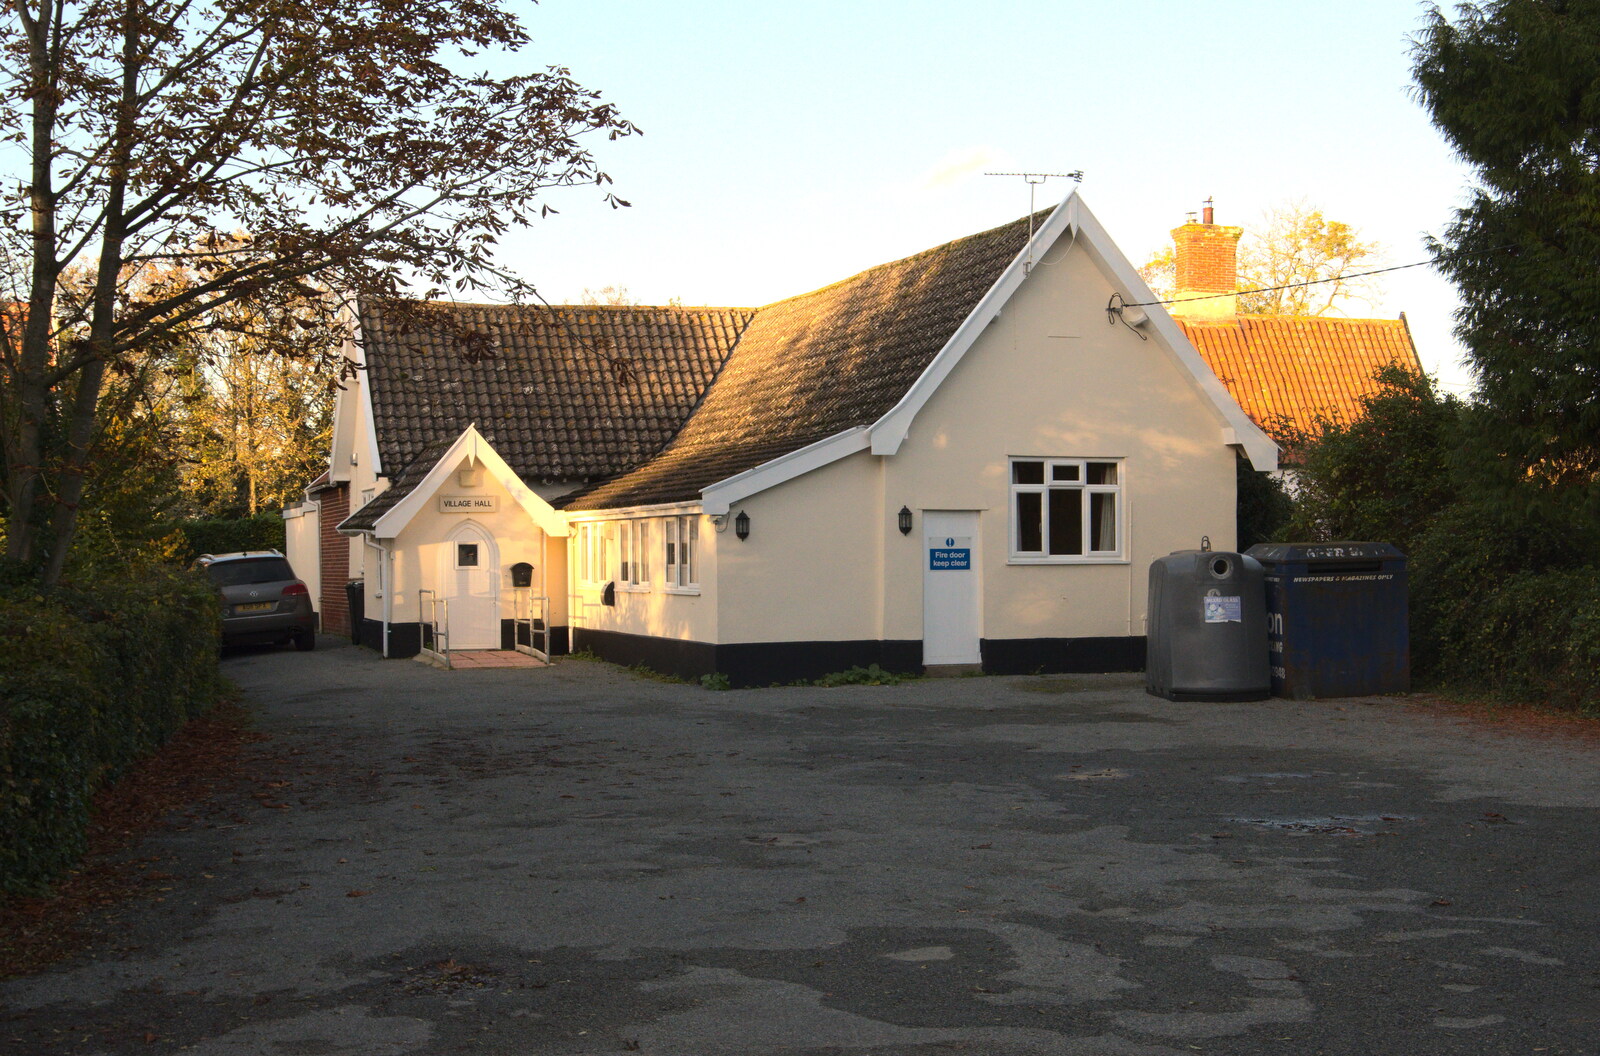 The Brome village hall from A Walk Around the Avenue, Brome, Suffolk - 25th October 2020